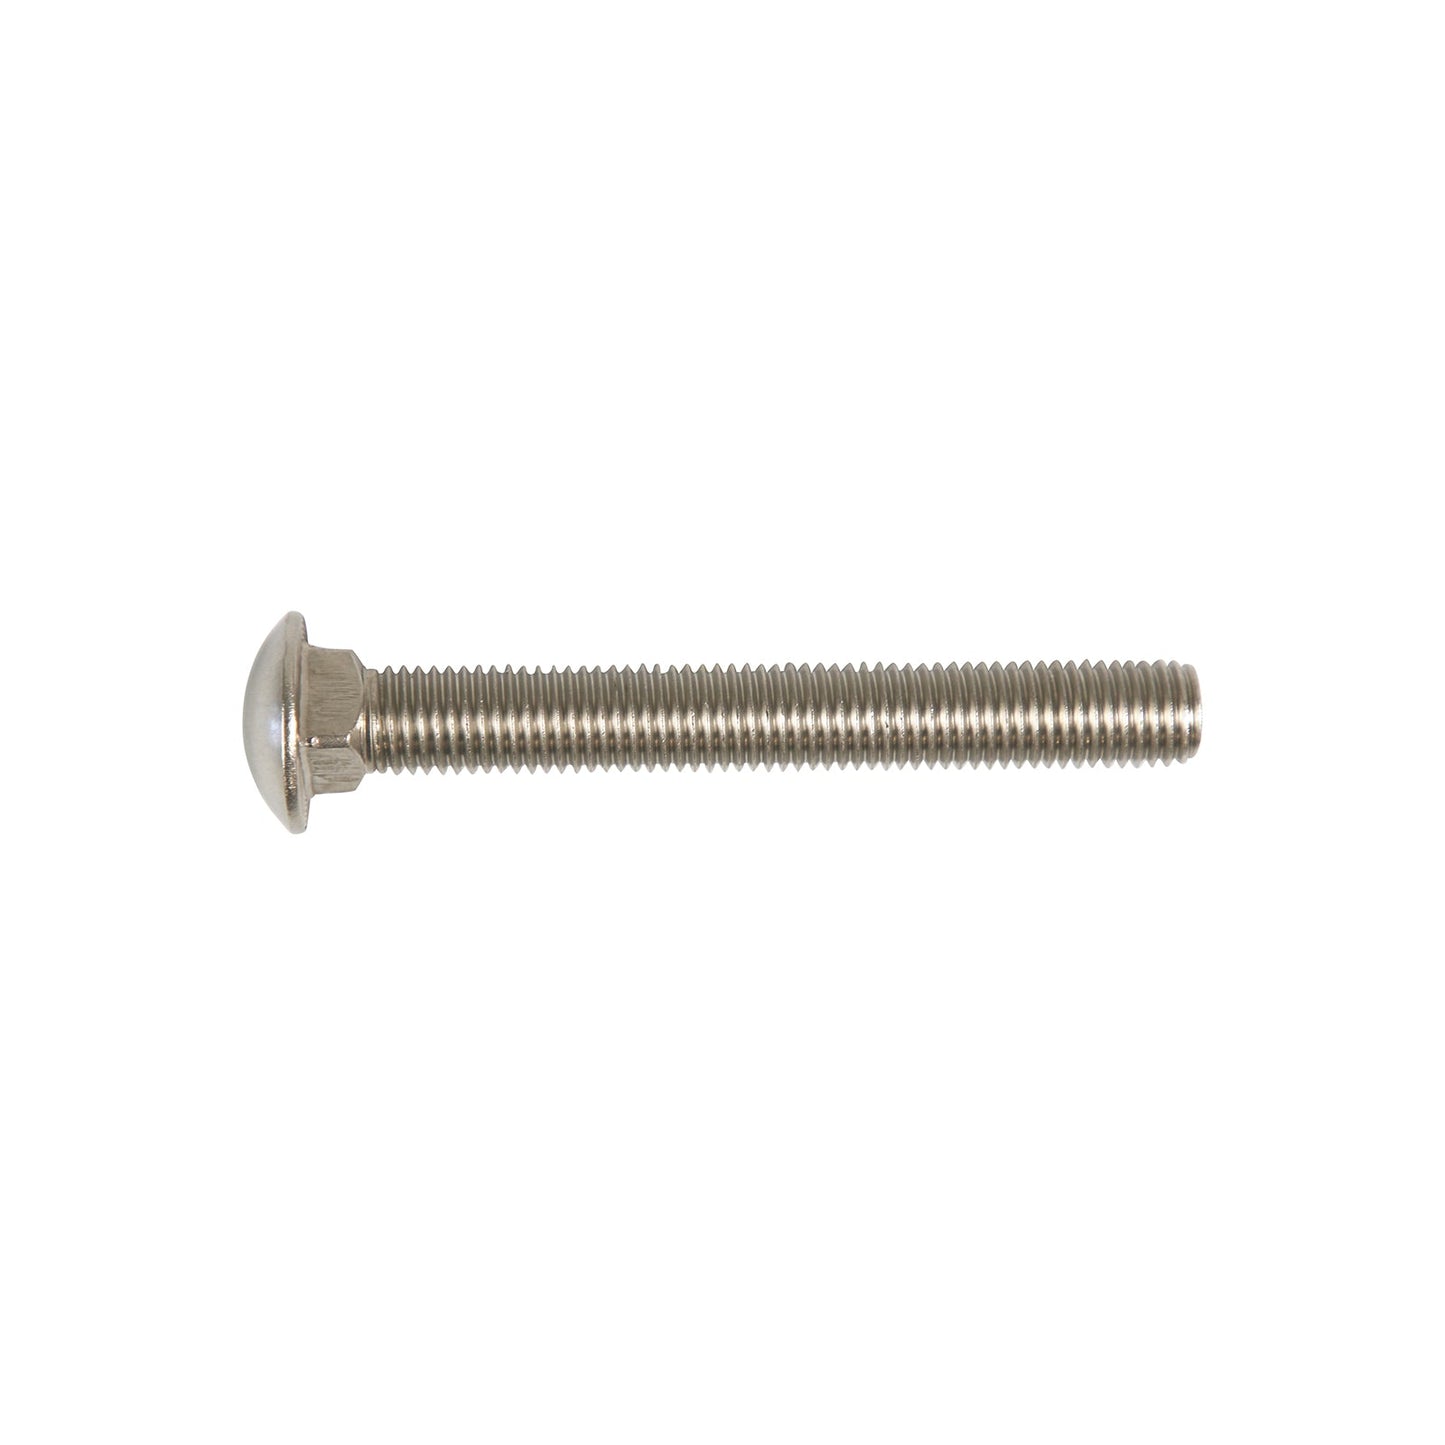 3/4"-10 x 6" Conquest Carriage Bolt - 304 Stainless Steel